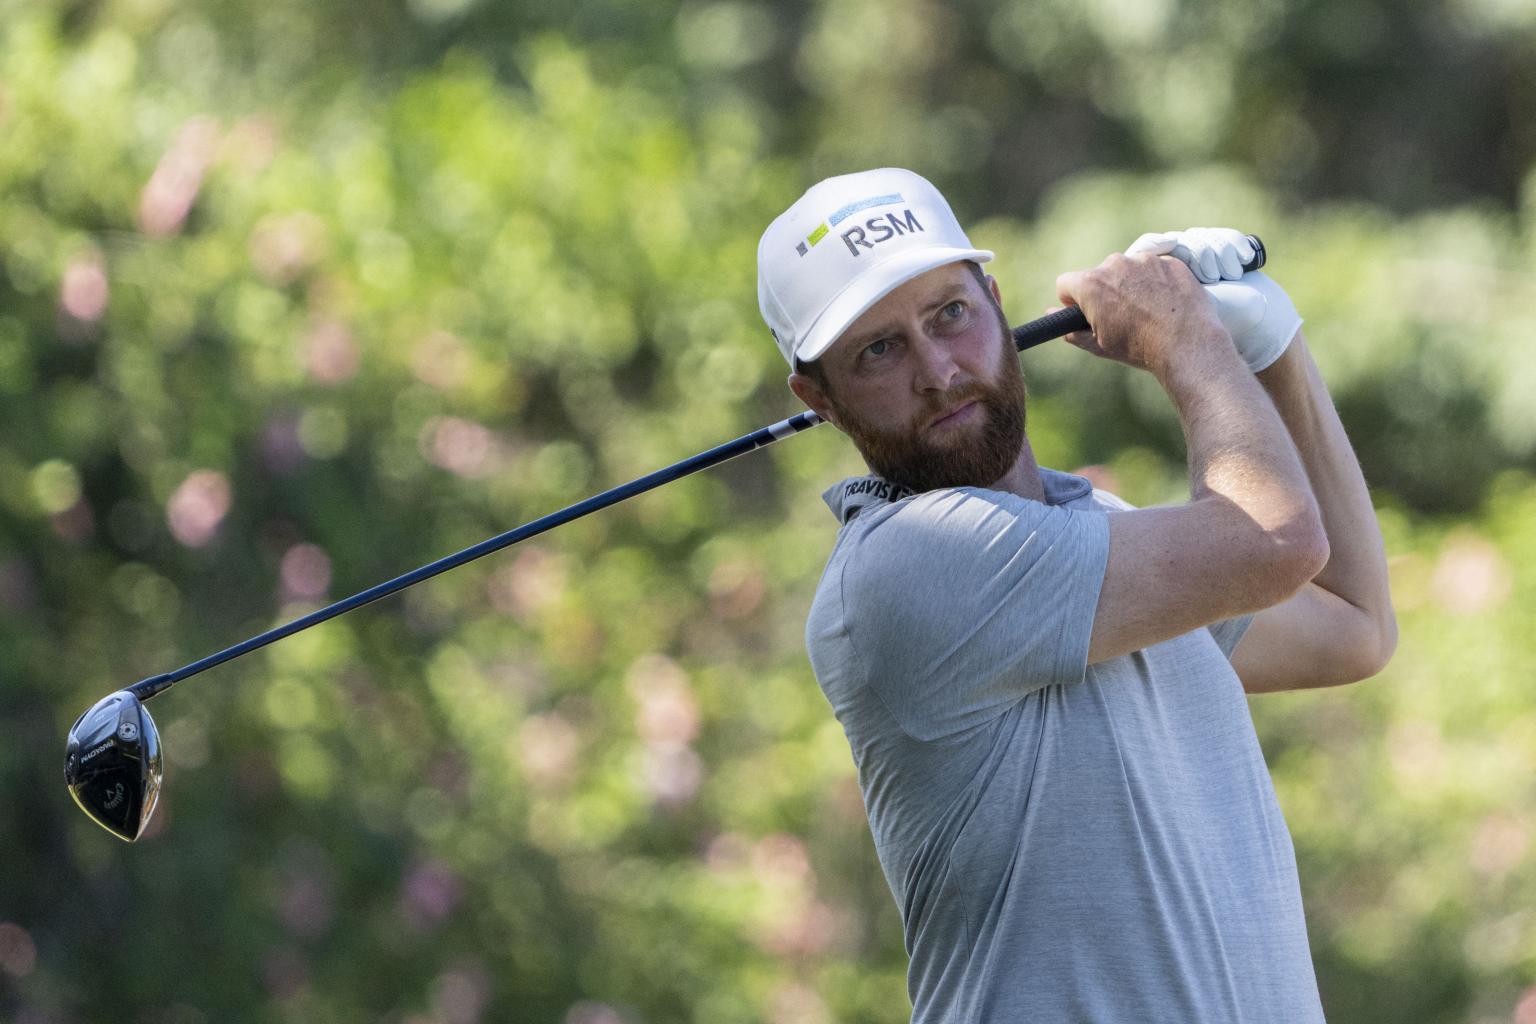 PGA Tour pro looking to end 2,791day winless drought at Sony Open